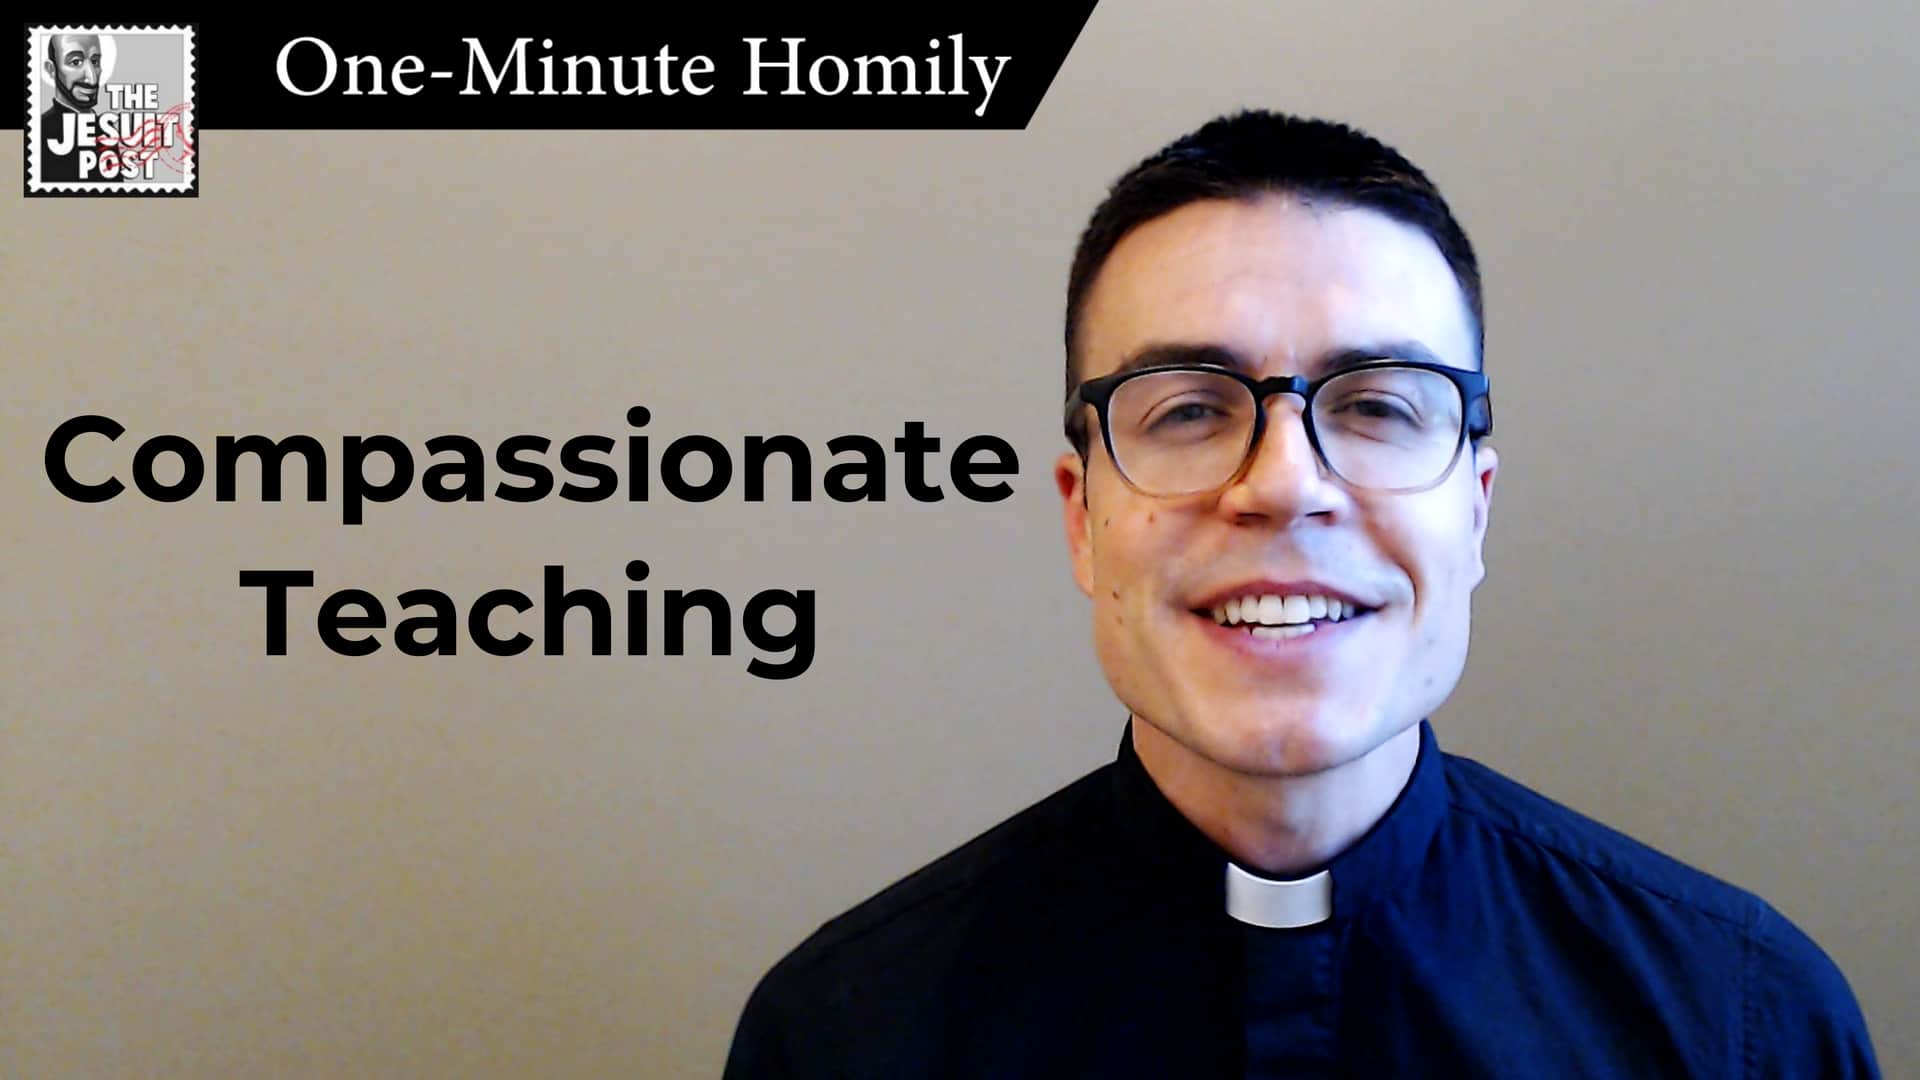 One-Minute Homily: “Compassionate Teaching”